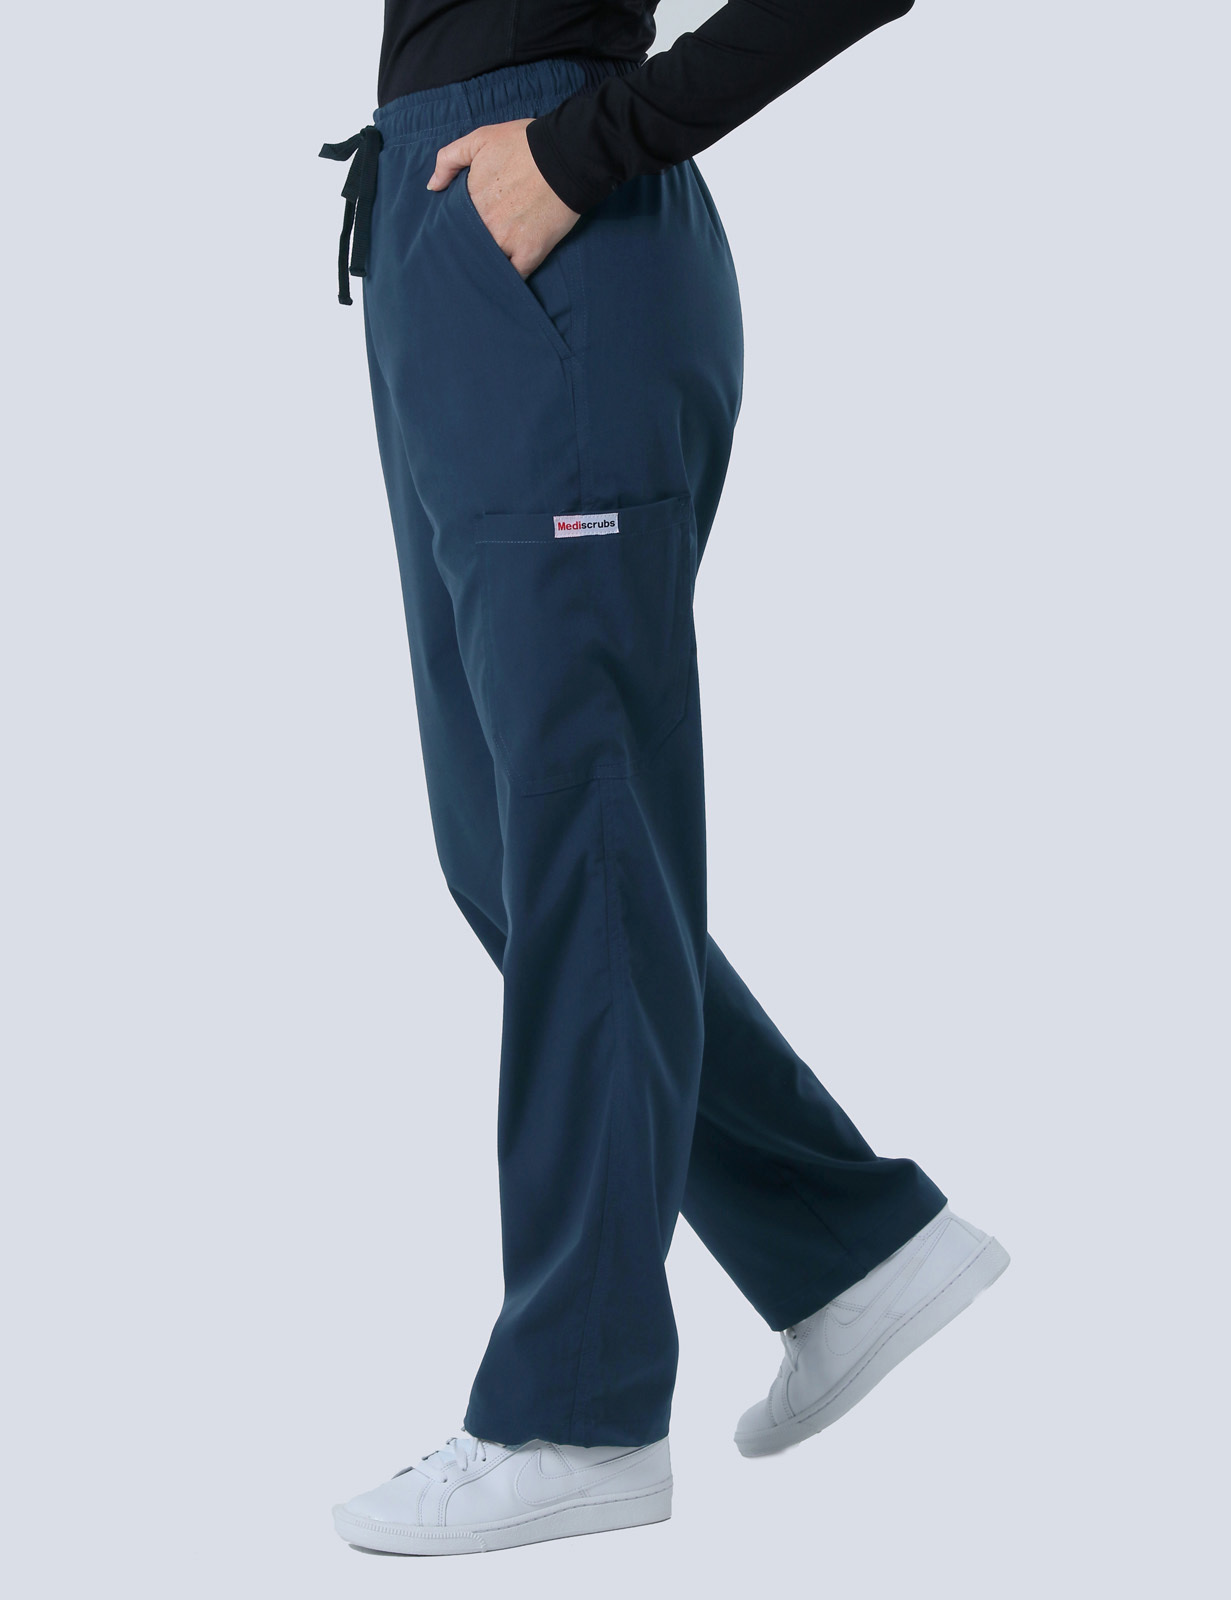 Inglewood MPHS - RN (Women's Fit Solid Scrub Top and Cargo Pants in Navy incl Logos)